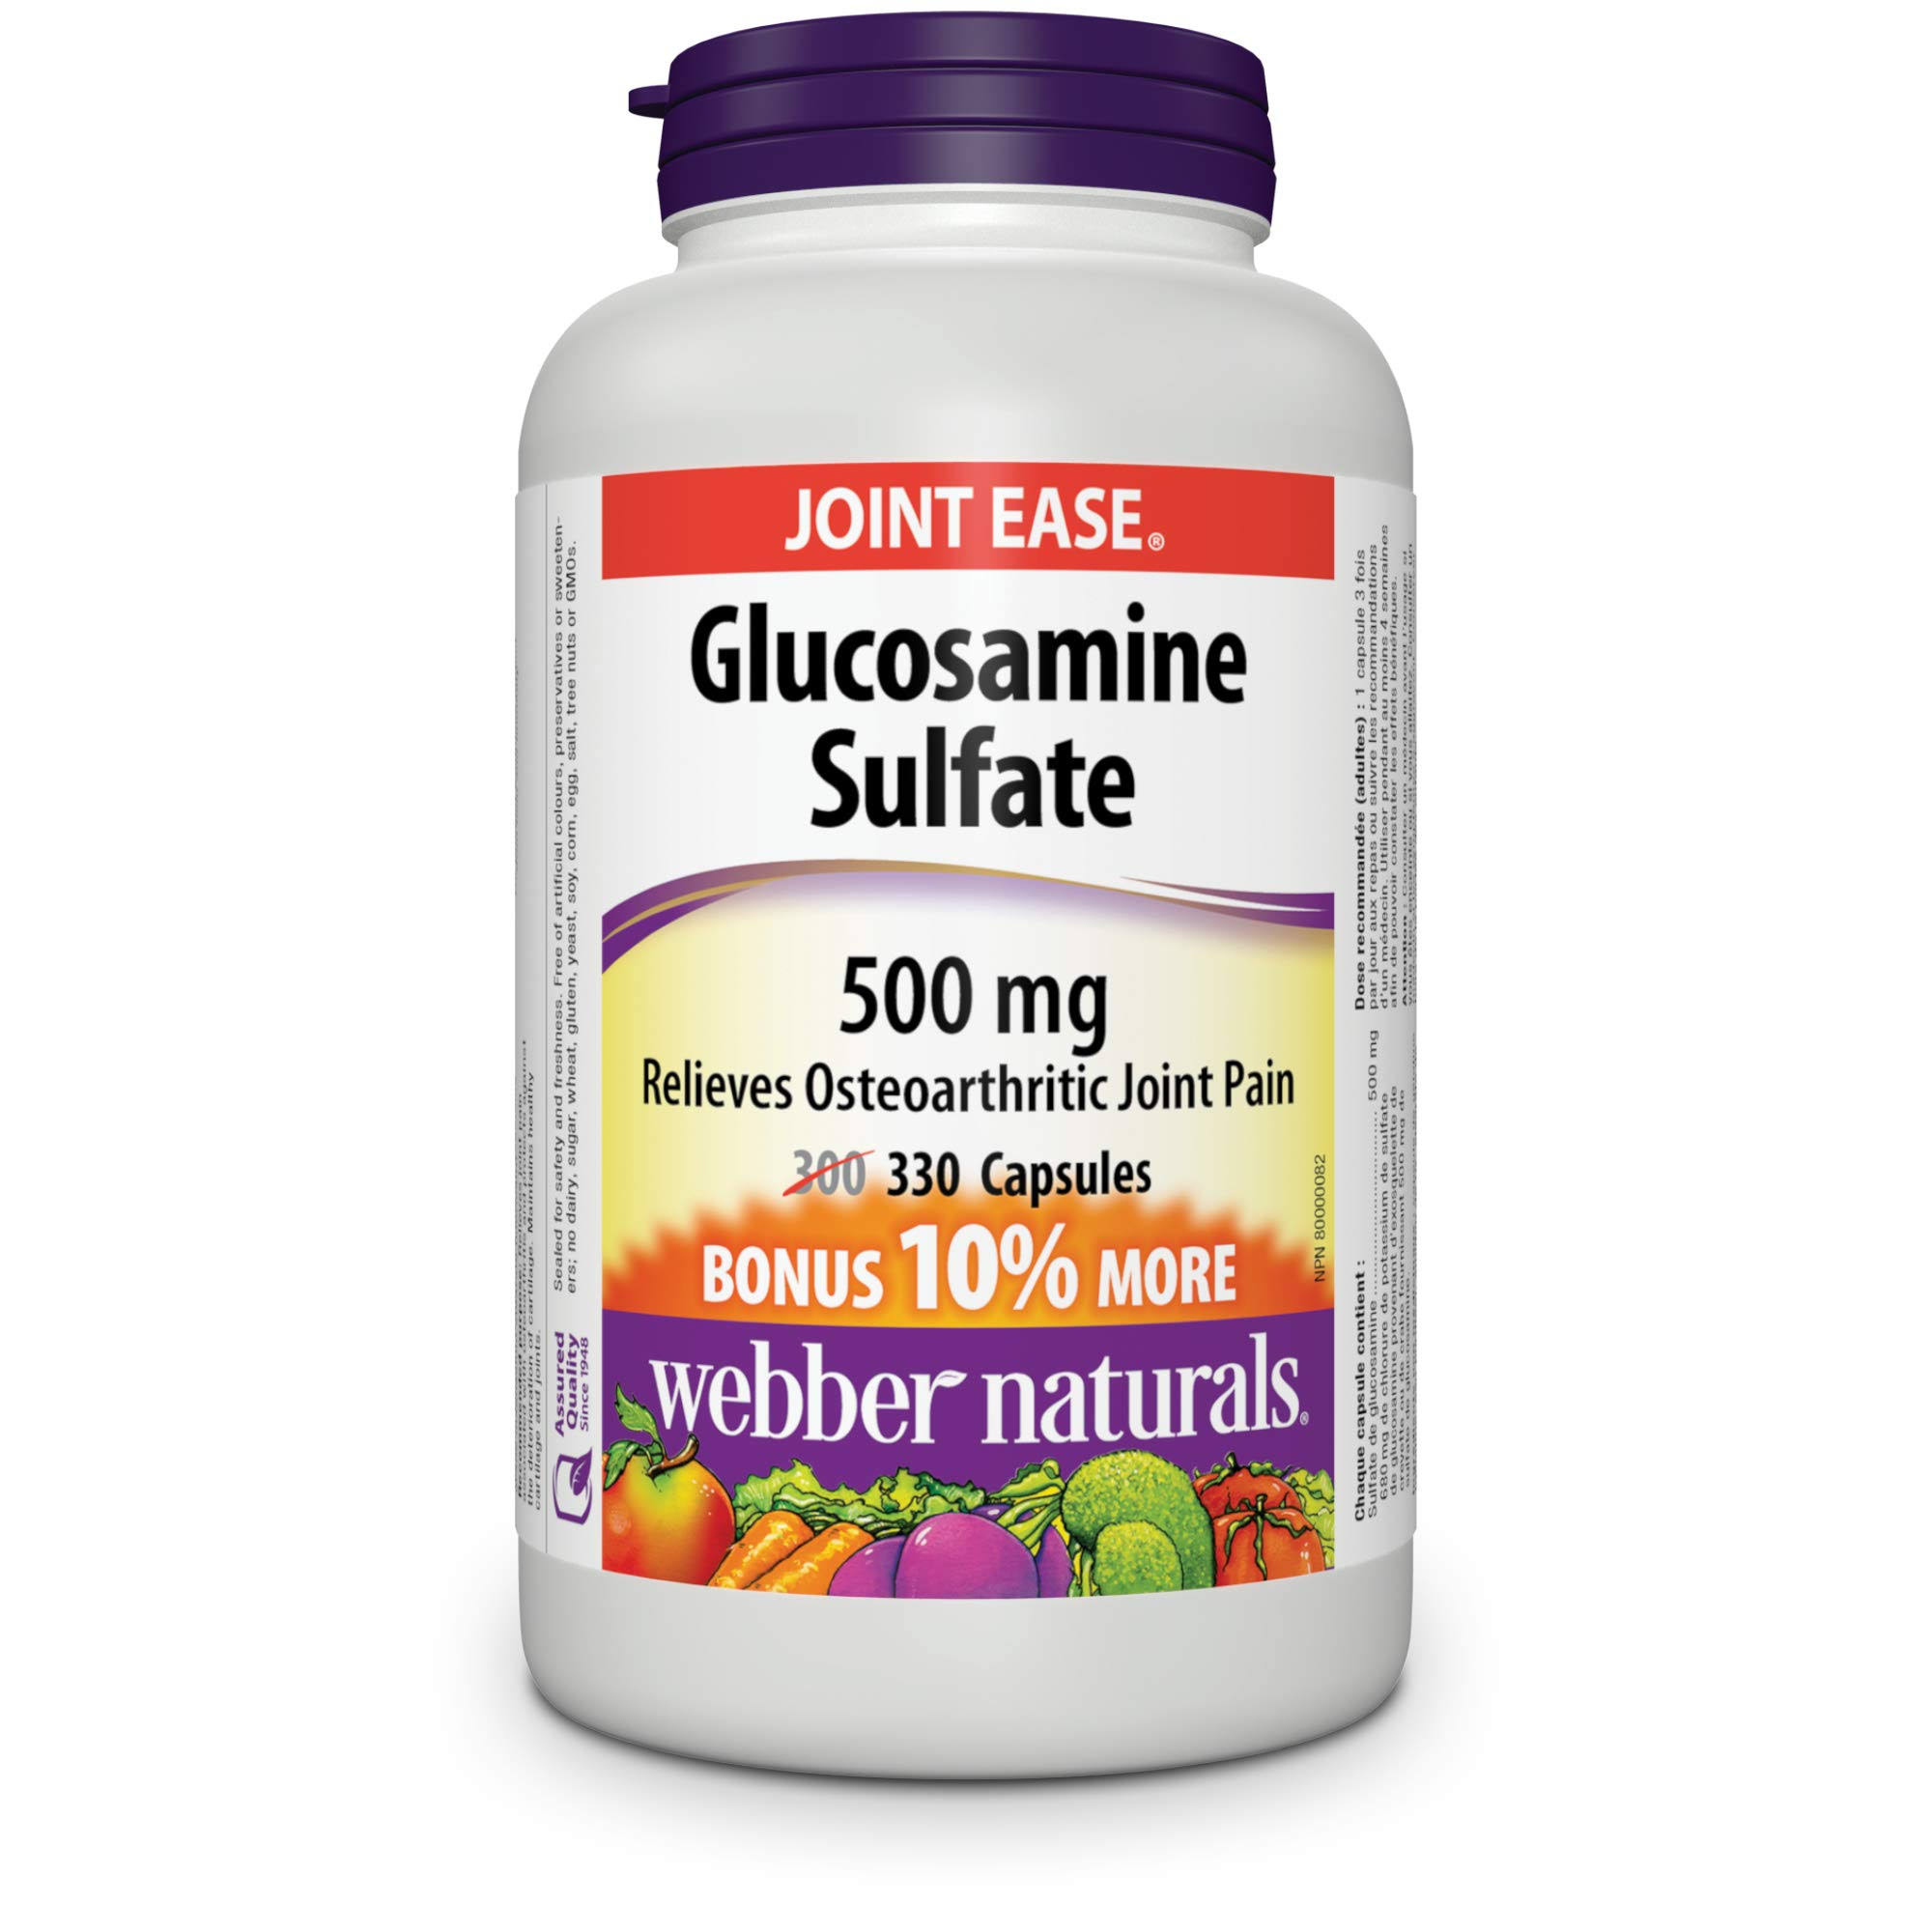 Webber Naturals Glucosamine Sulfate Dietary Supplement - 500mg, 330ct